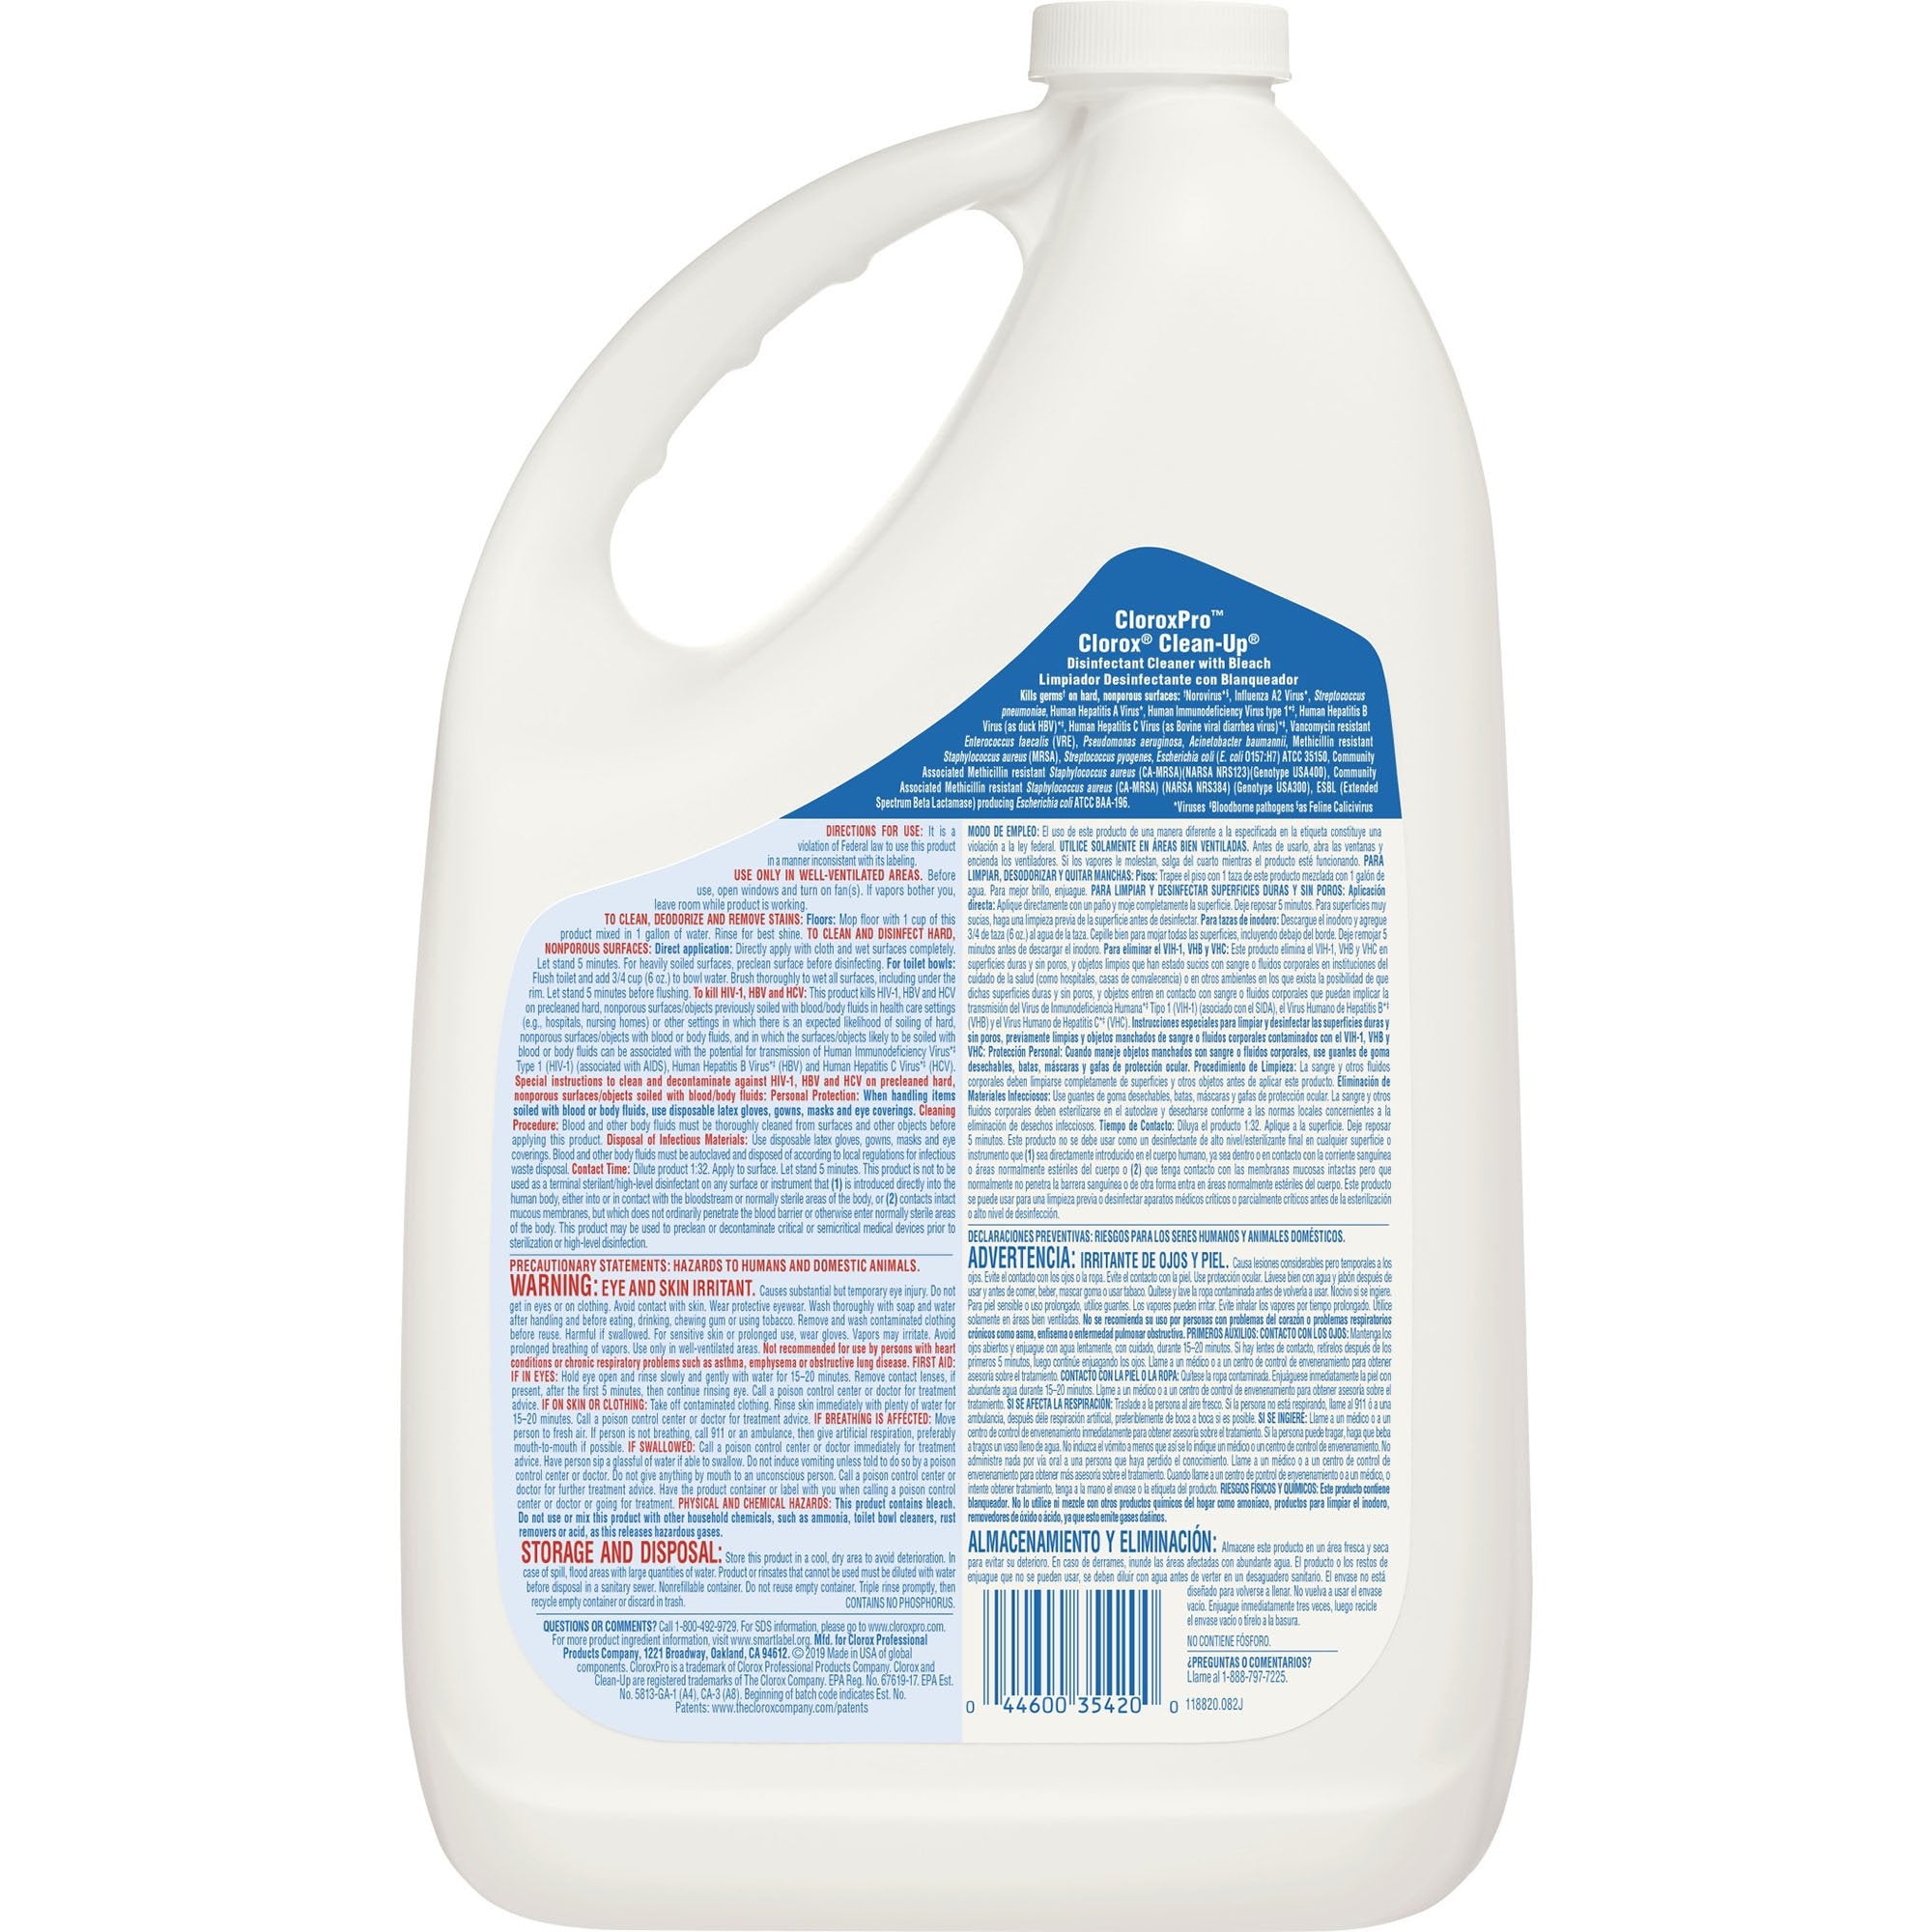 CloroxPro™ Clorox® Clean-Up® with Bleach Surface Disinfectant Cleaner Refill Manual Pour Liquid 1 gal. Jug Chlorine Scent NonSterile